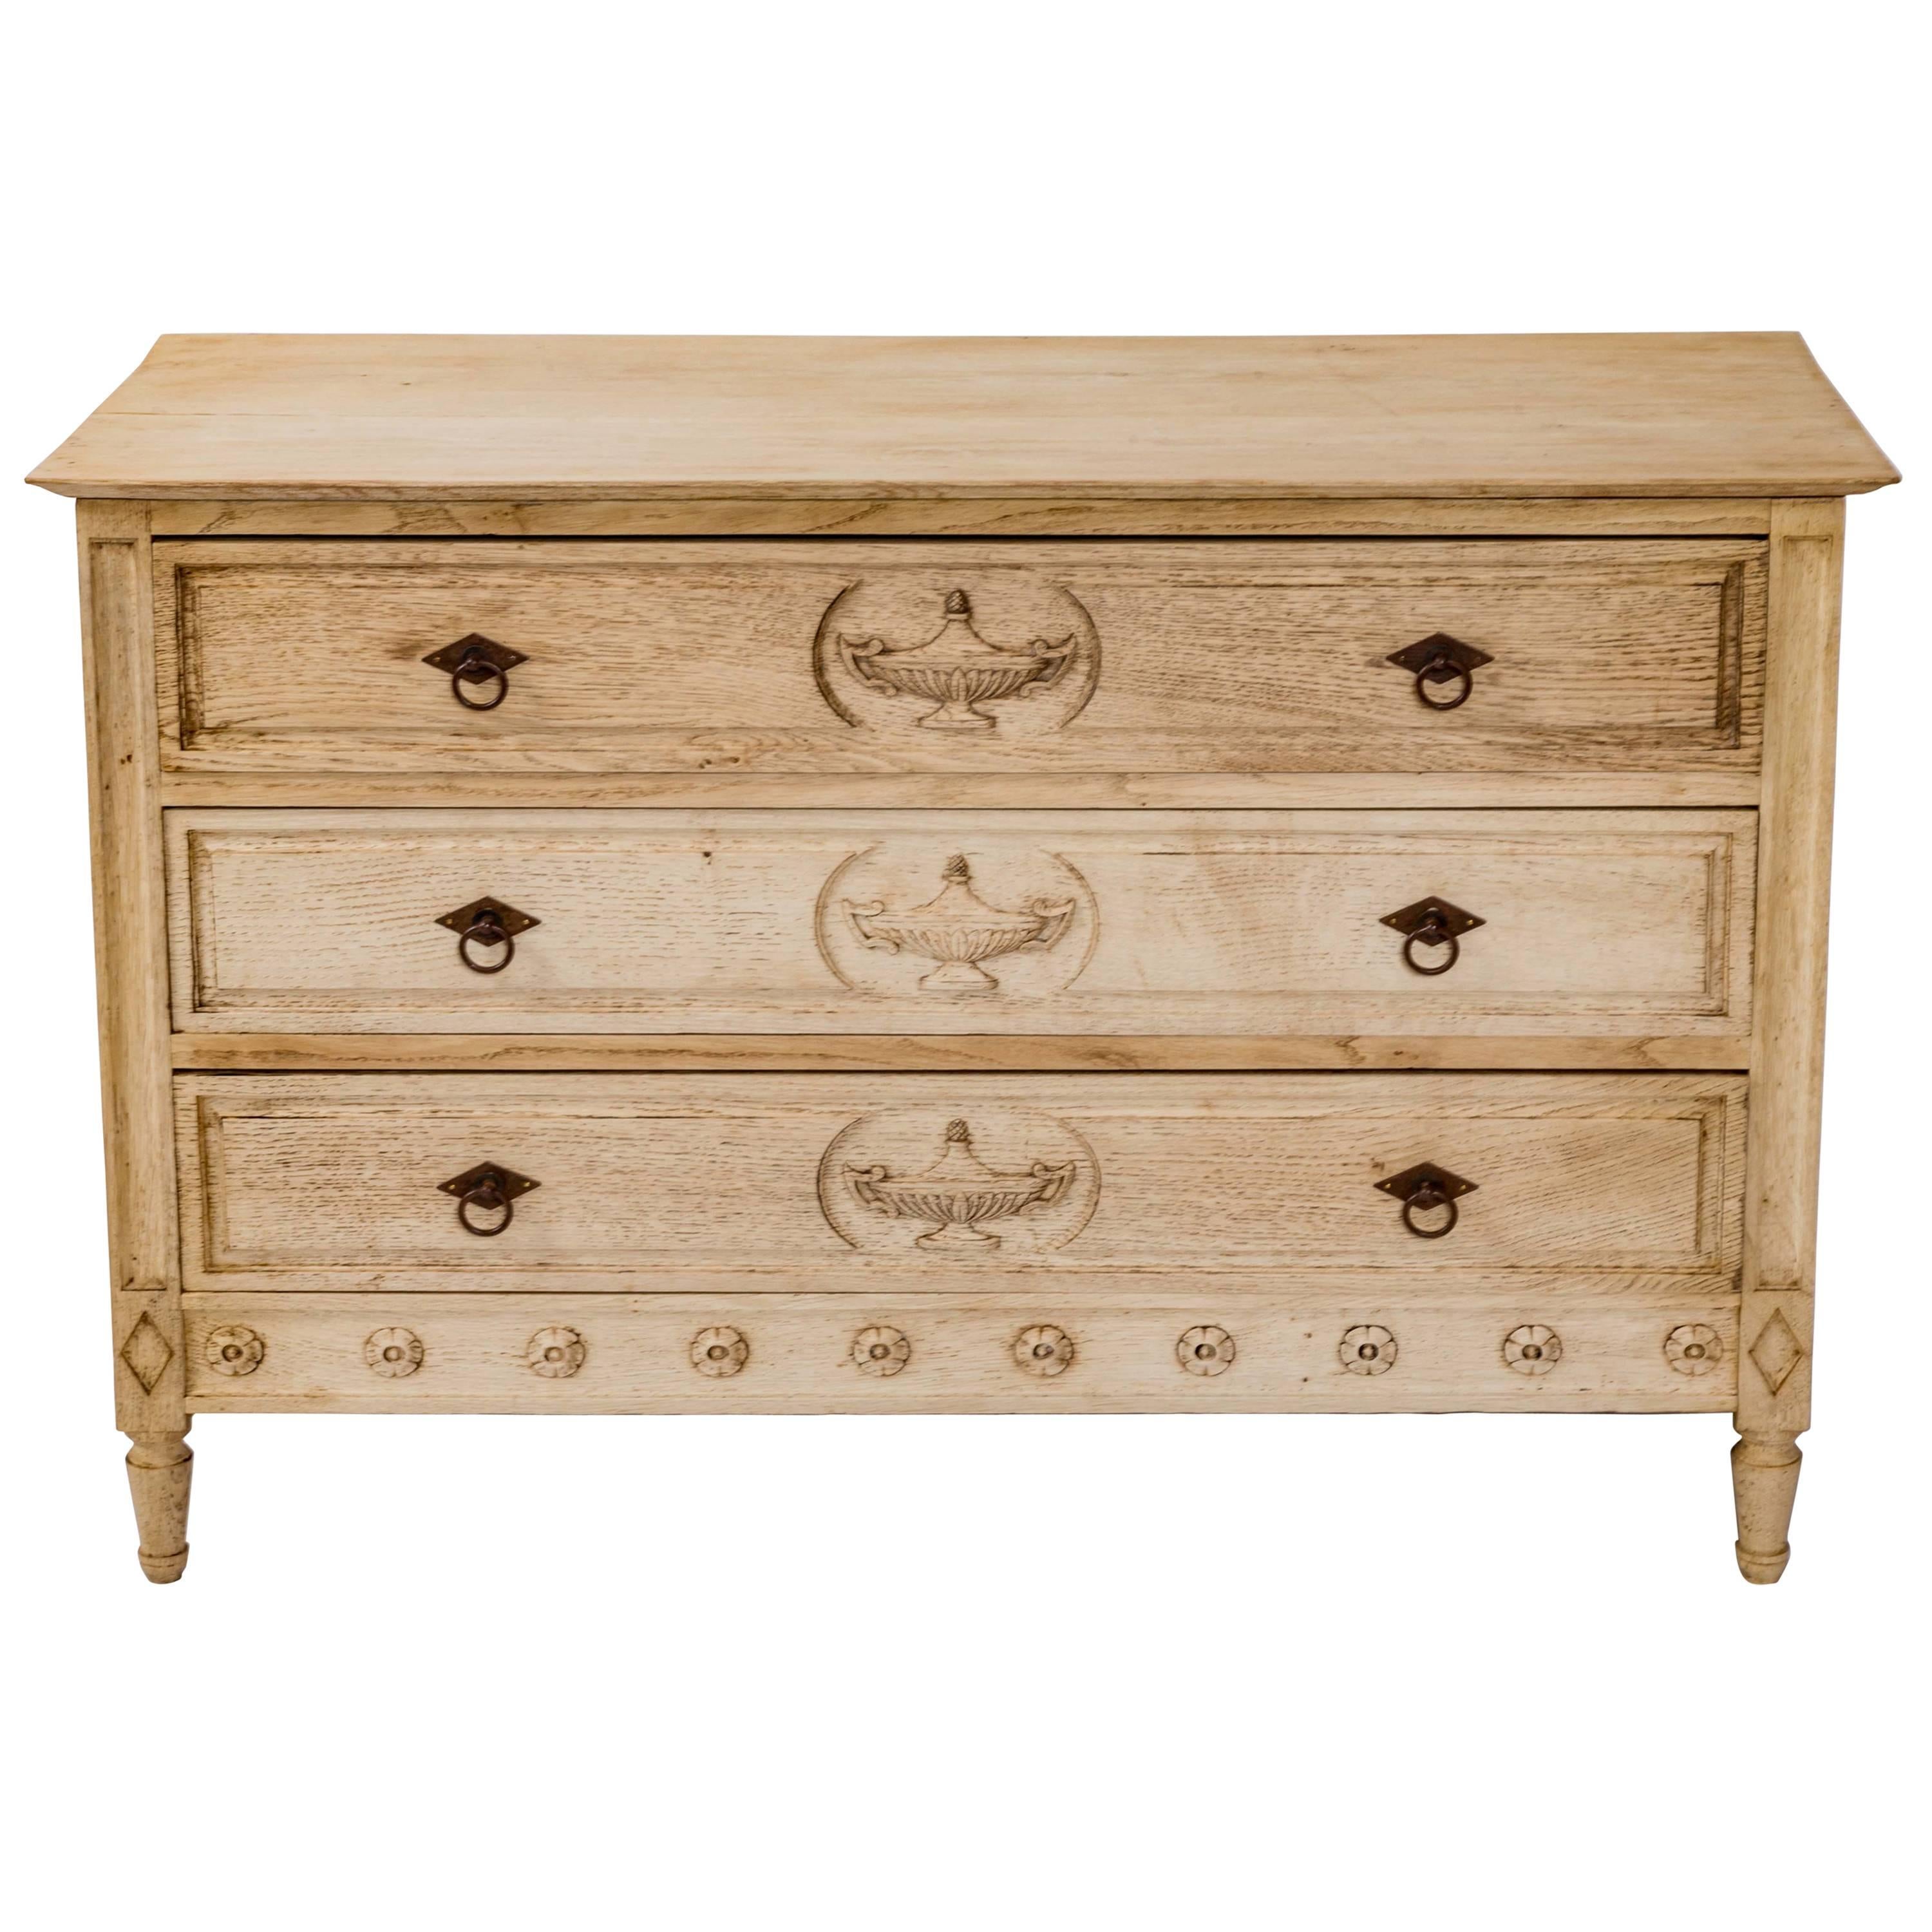 Early 19th Century Bleached Oak Chest of Drawers, France, circa 1825